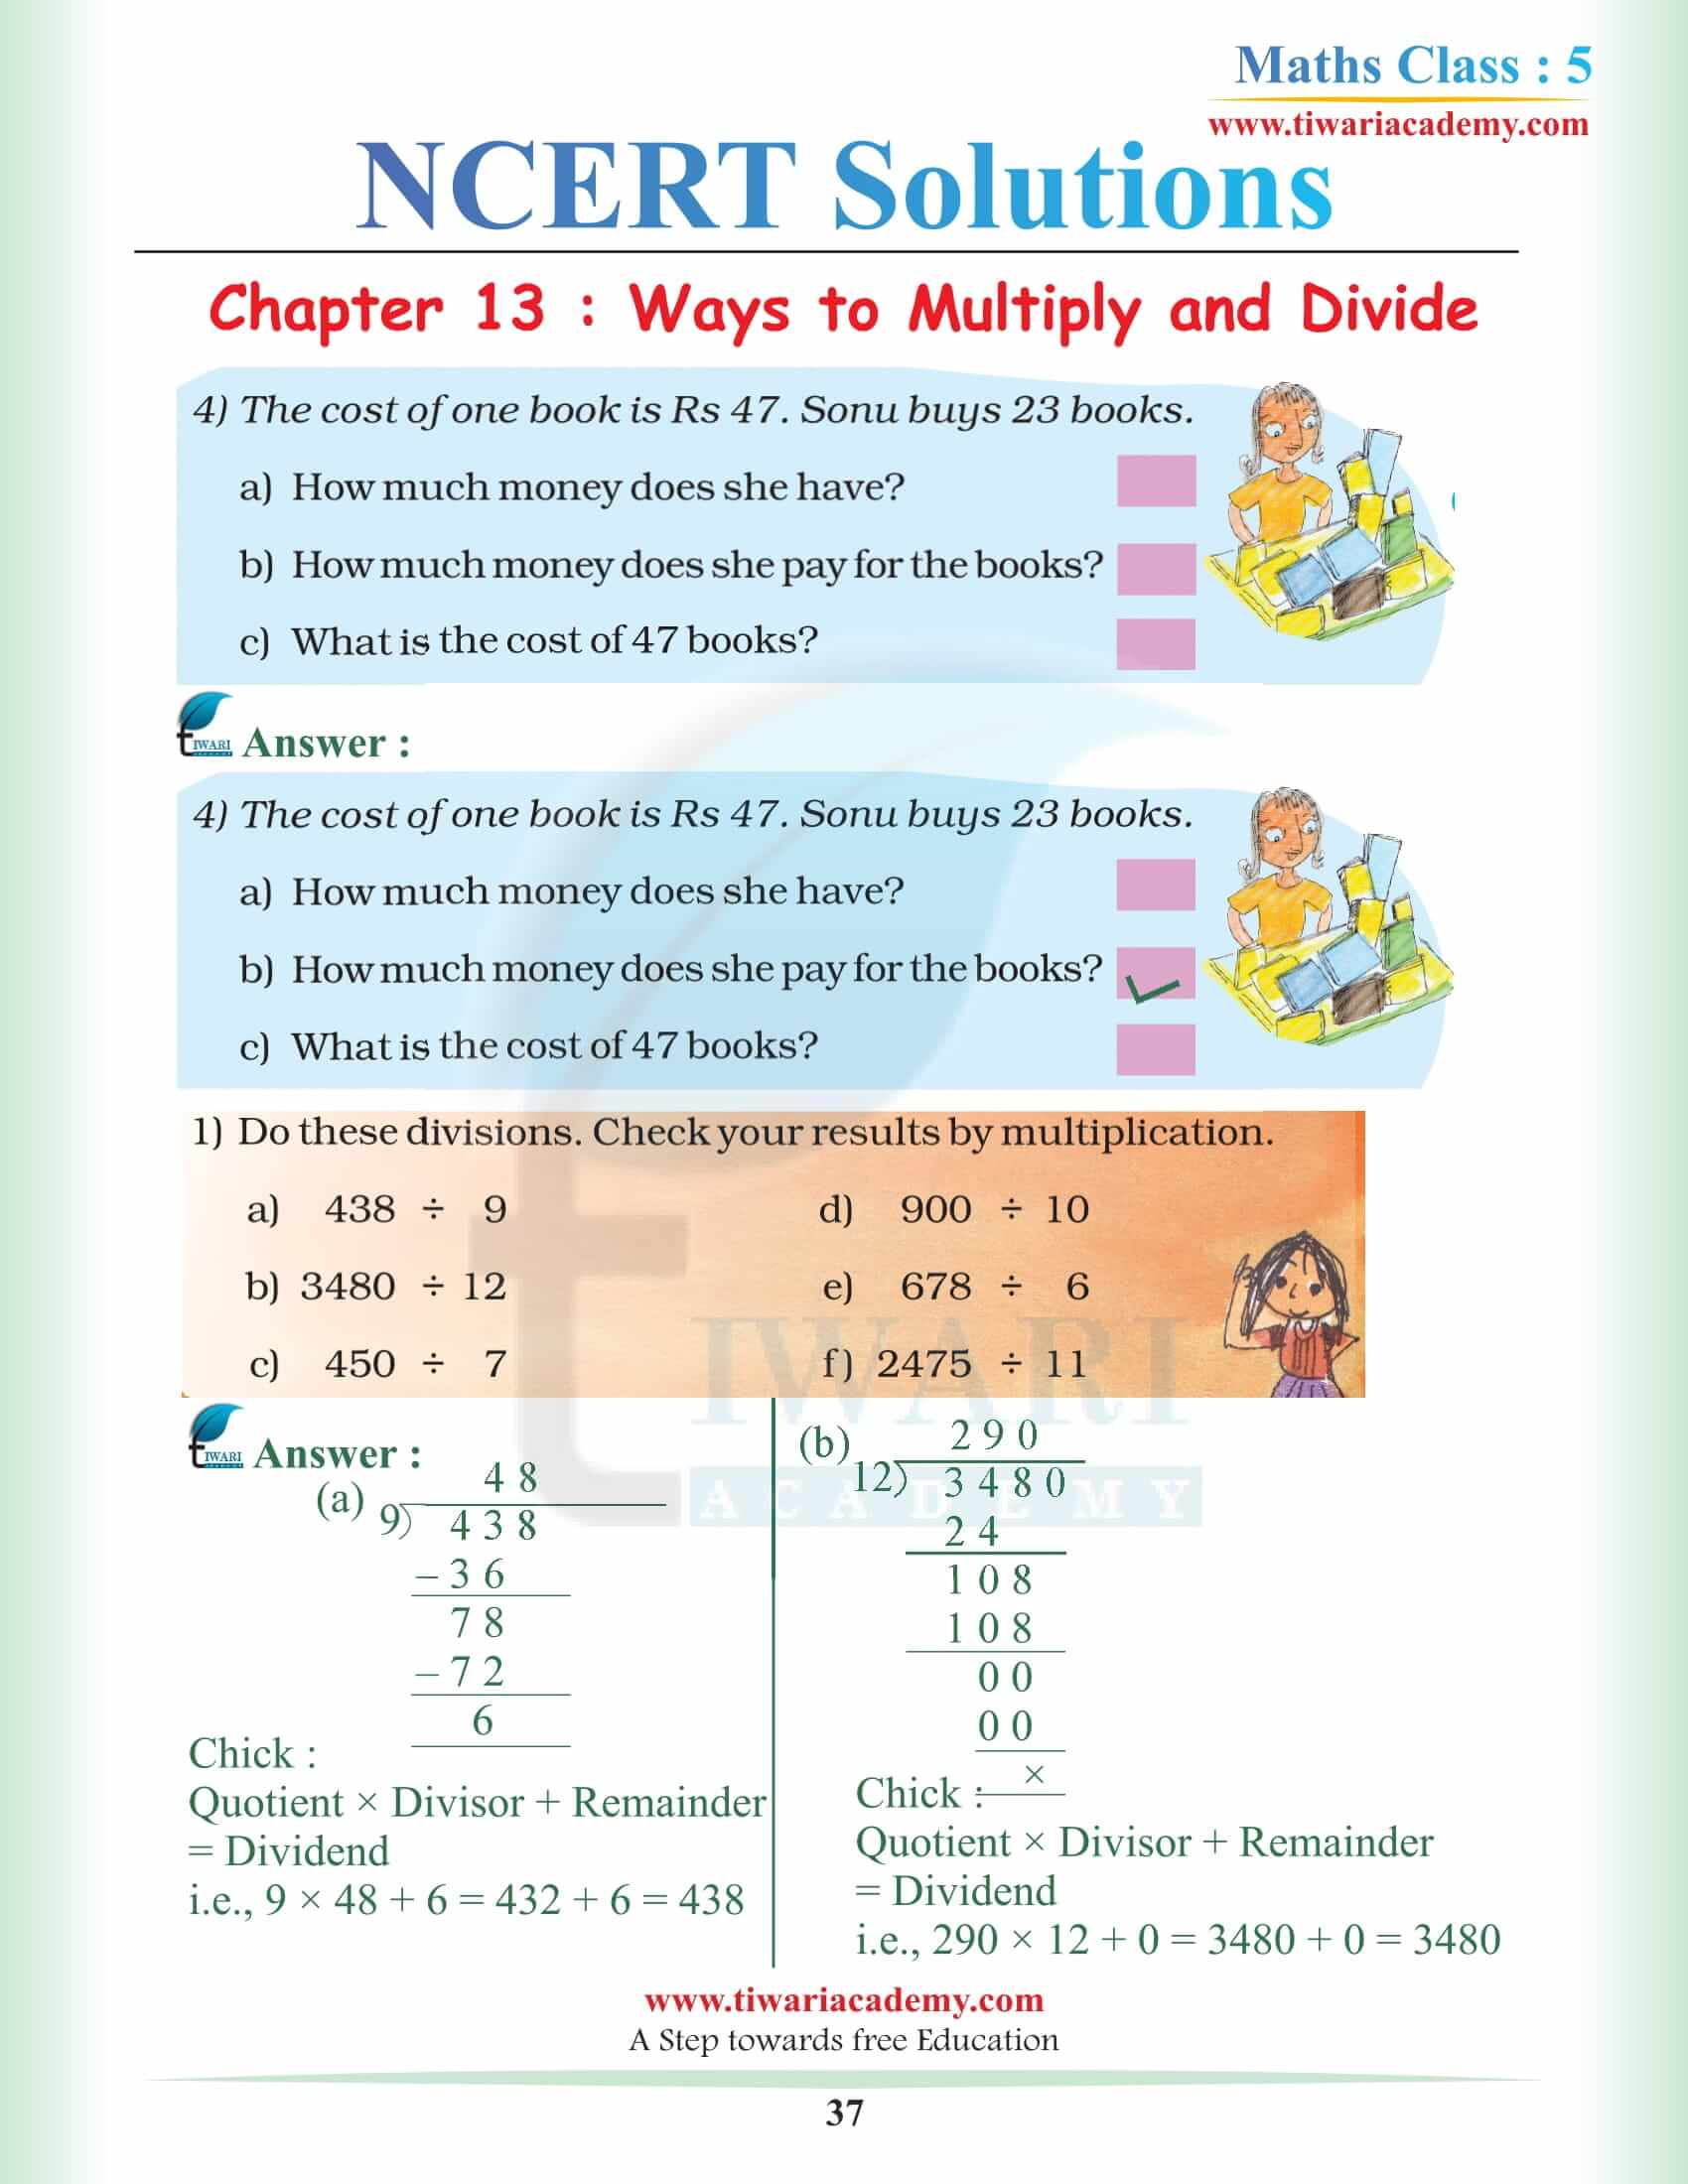 5th Math Chapter 13 NCERT Solutions in English Medium